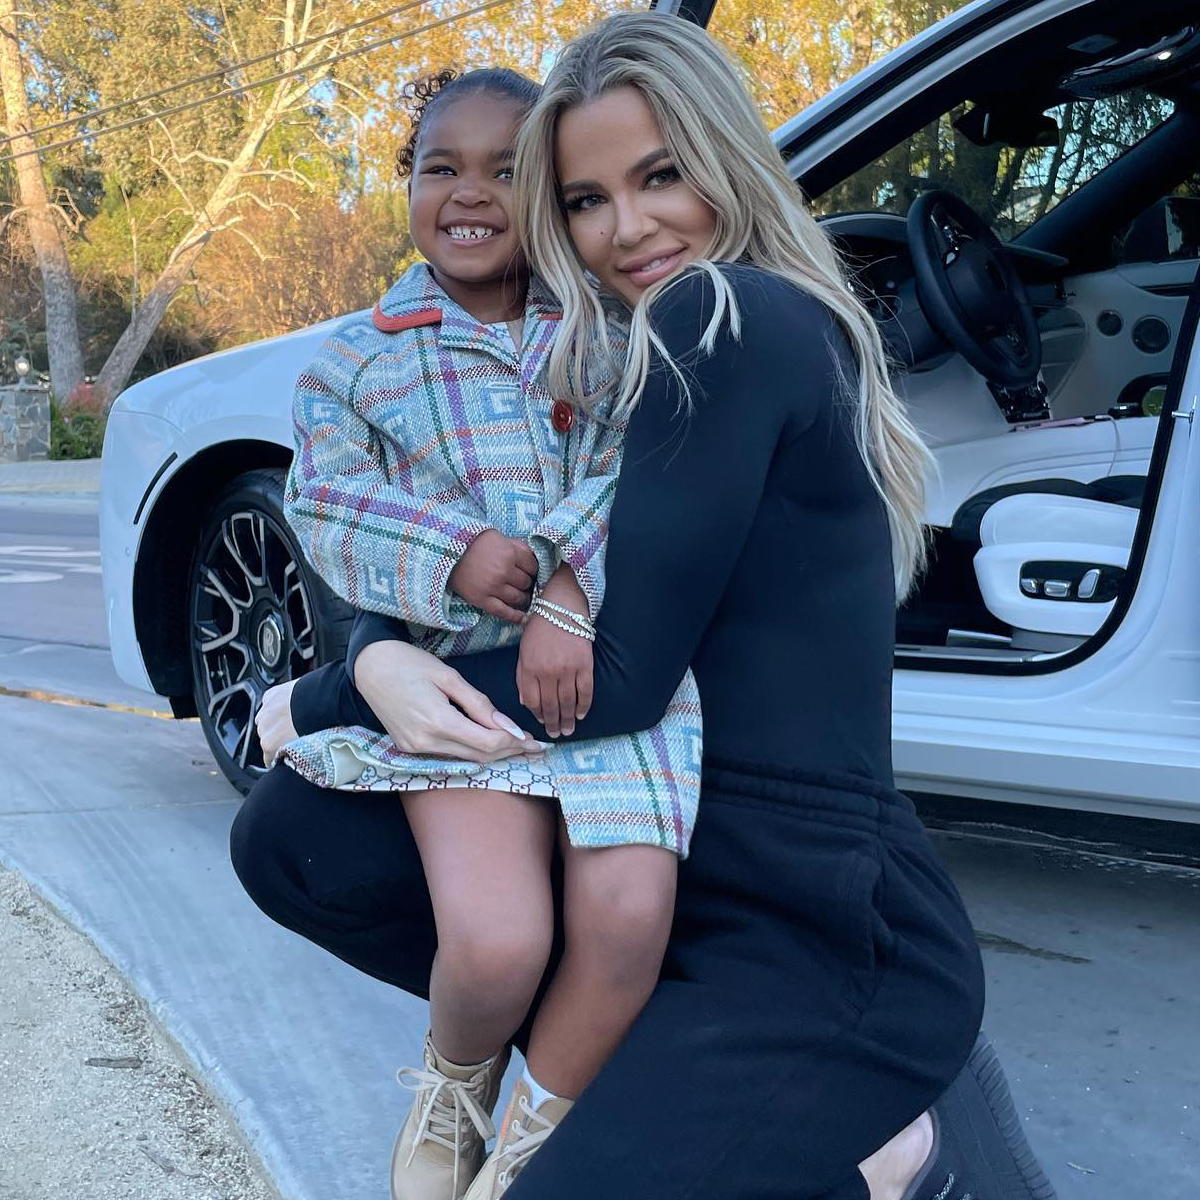 Khloe Kardashian's daughter True Thompson celebrates her upcoming fourth  birthday during a party